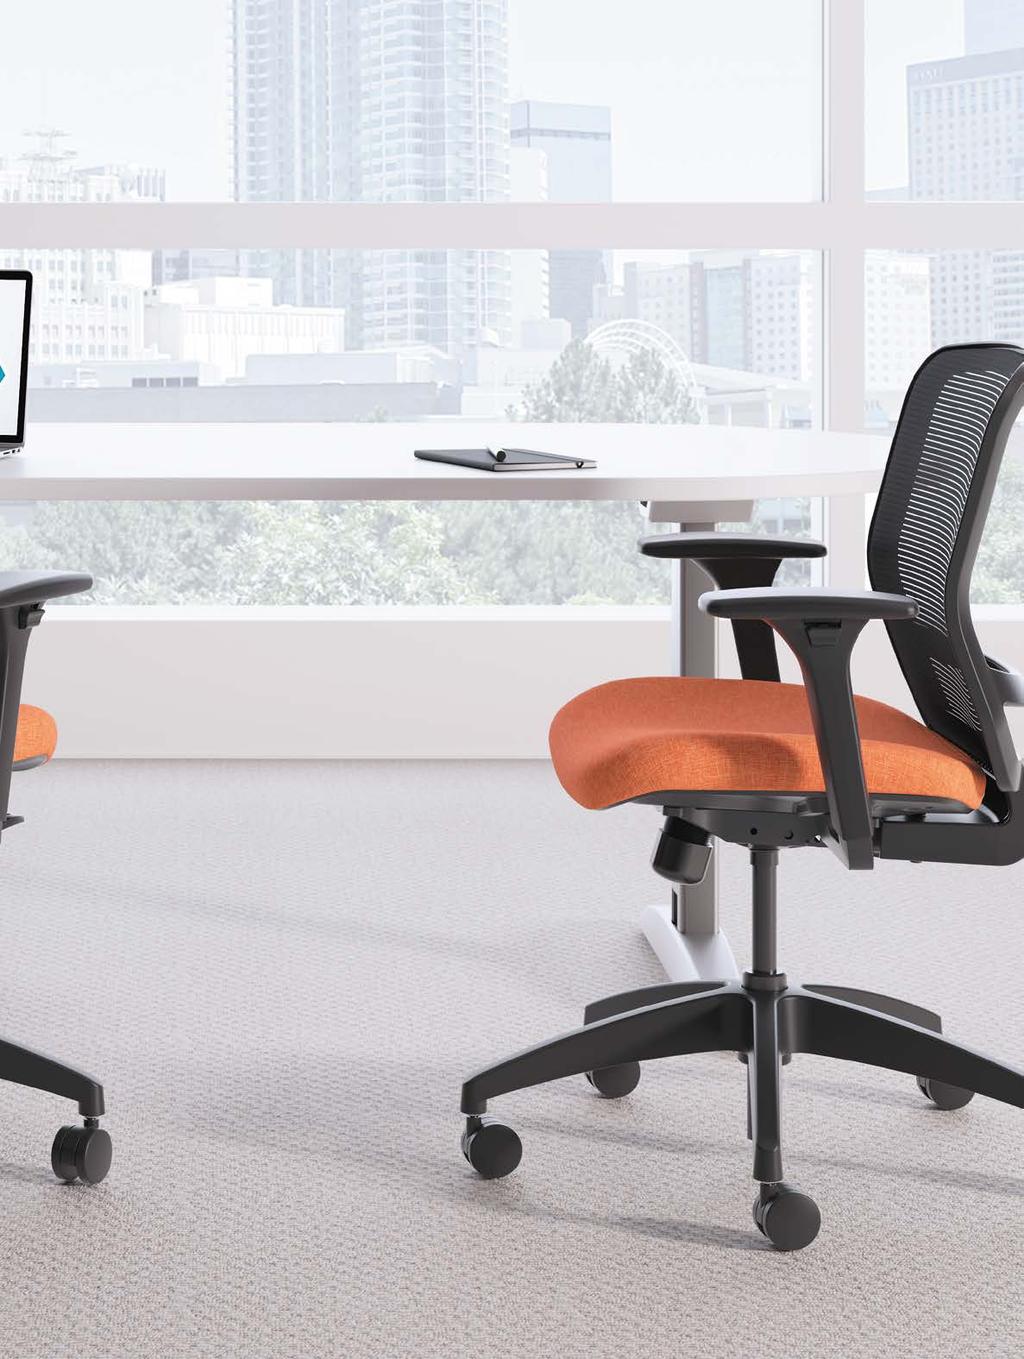 ACCOMMODATING FUNCTION Getting comfortable has never been as easy as it is with Quotient.